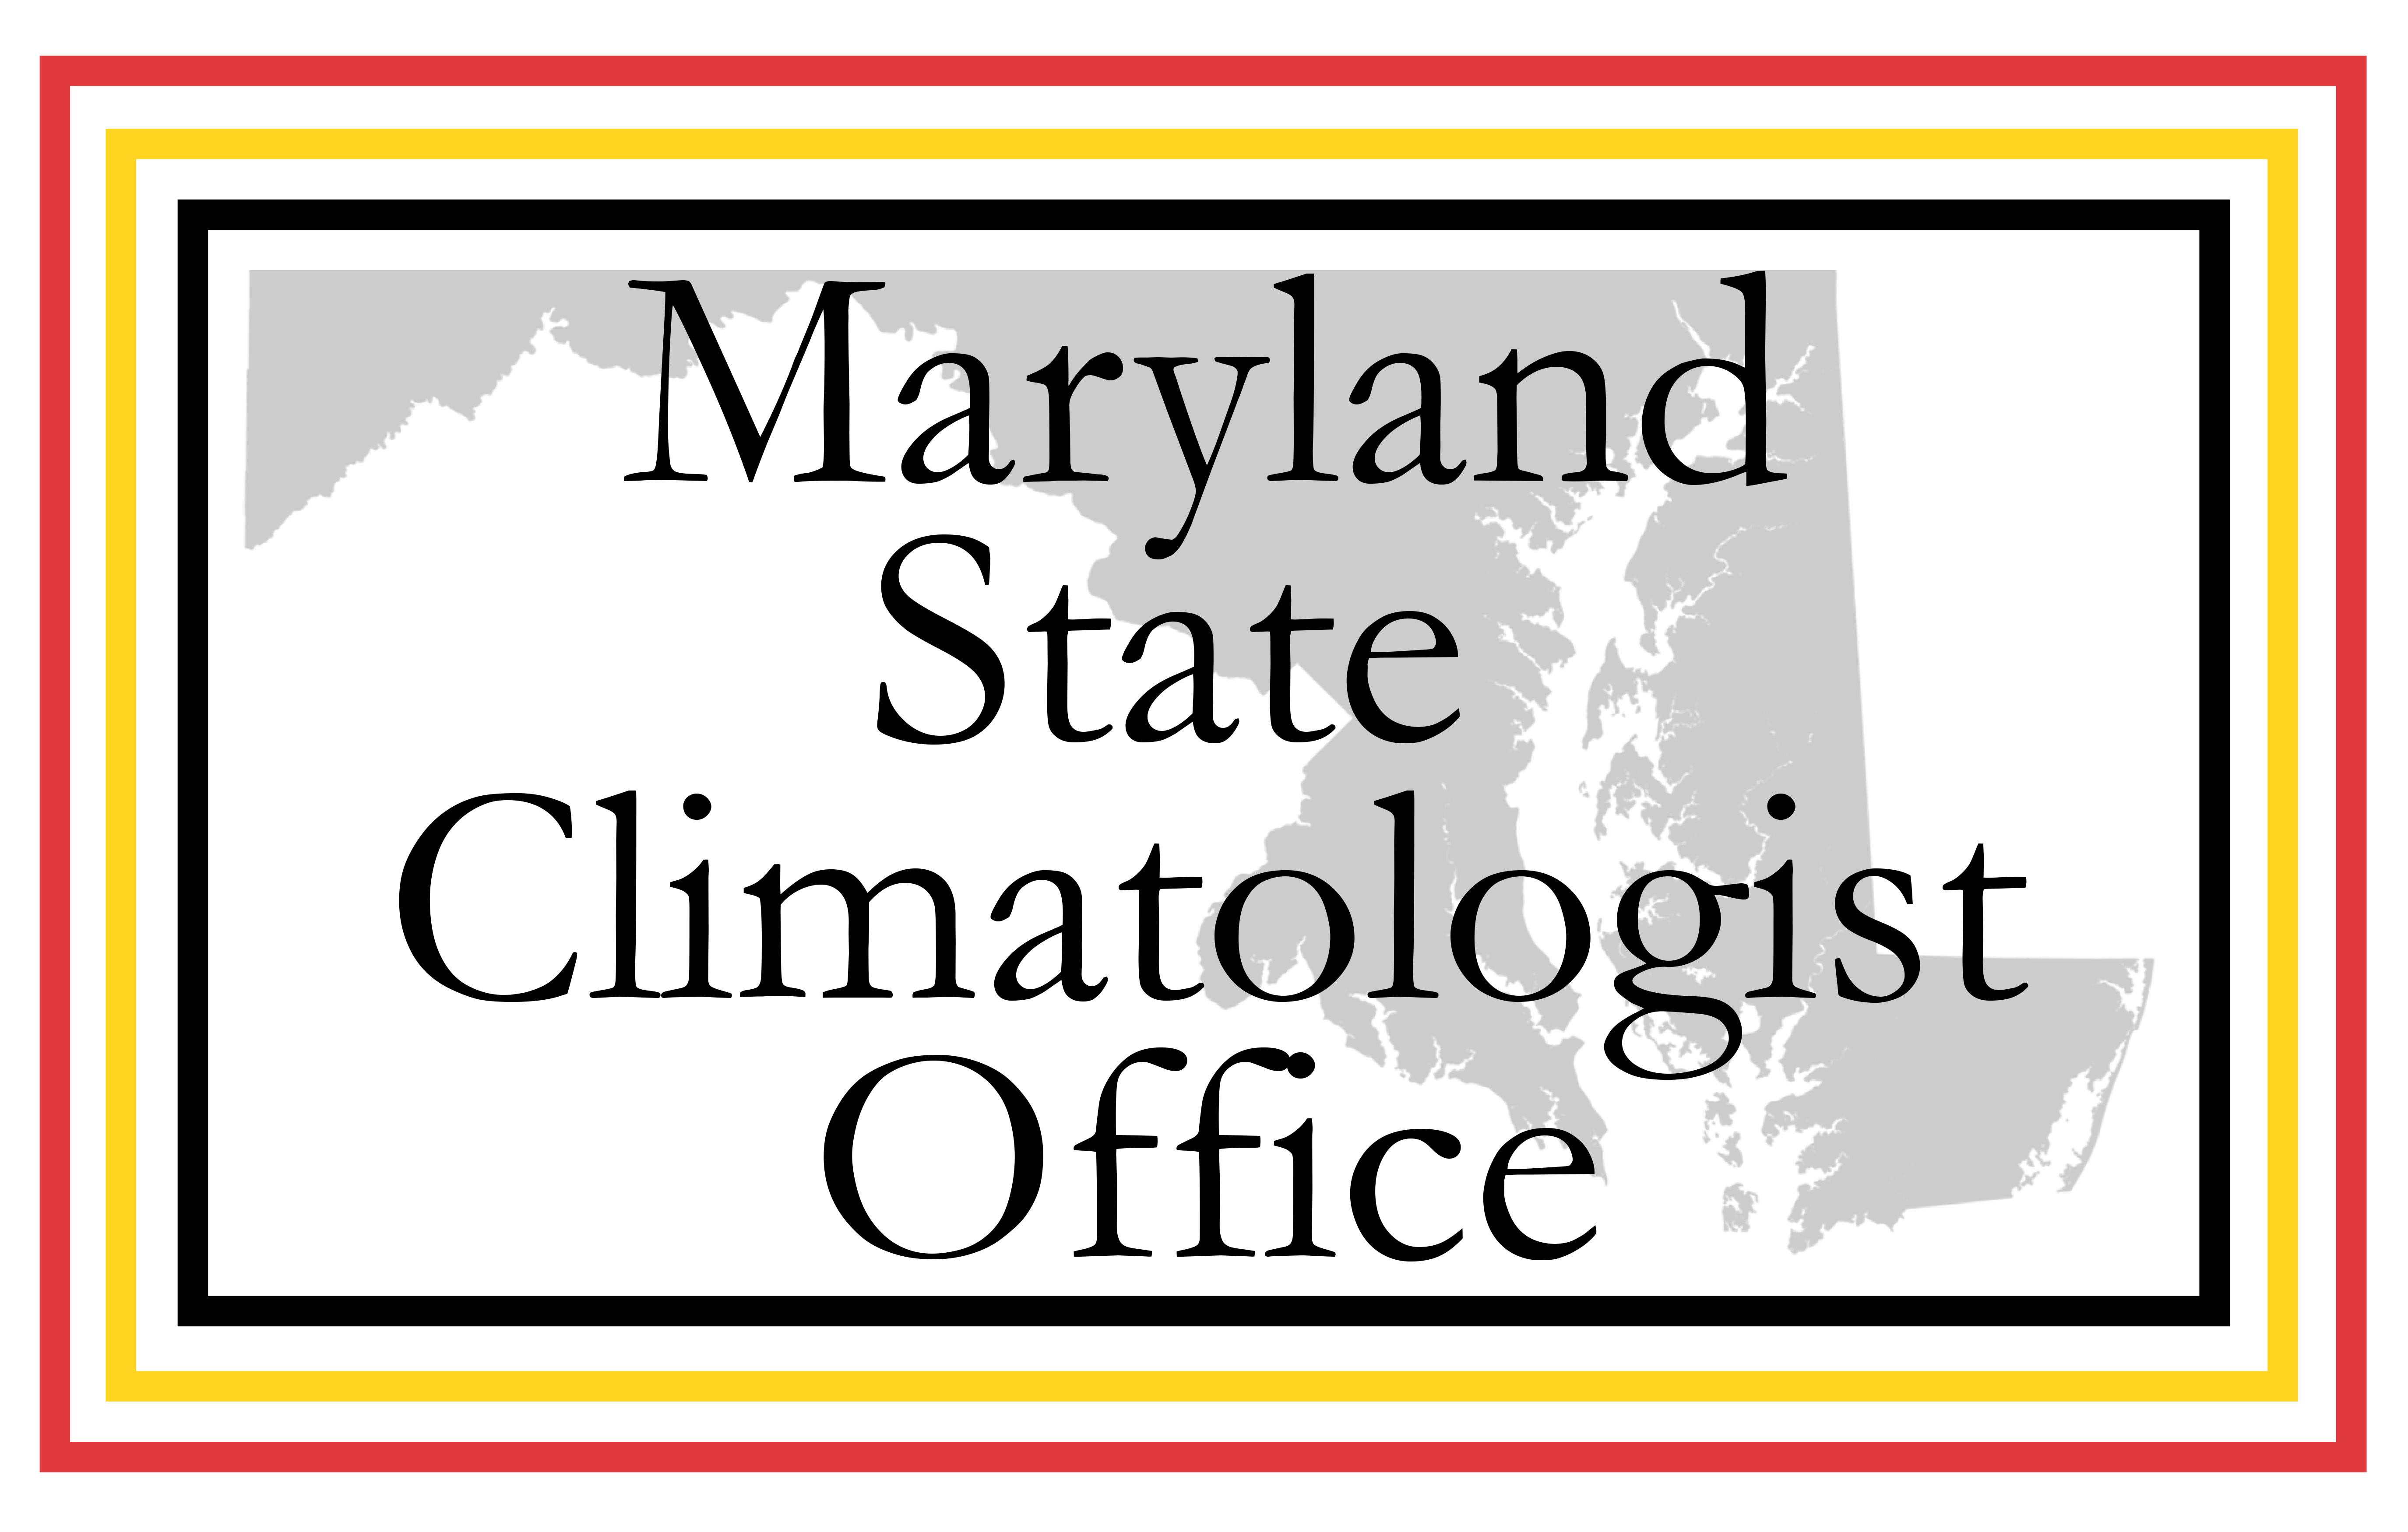 Maryland State Climatologist Office